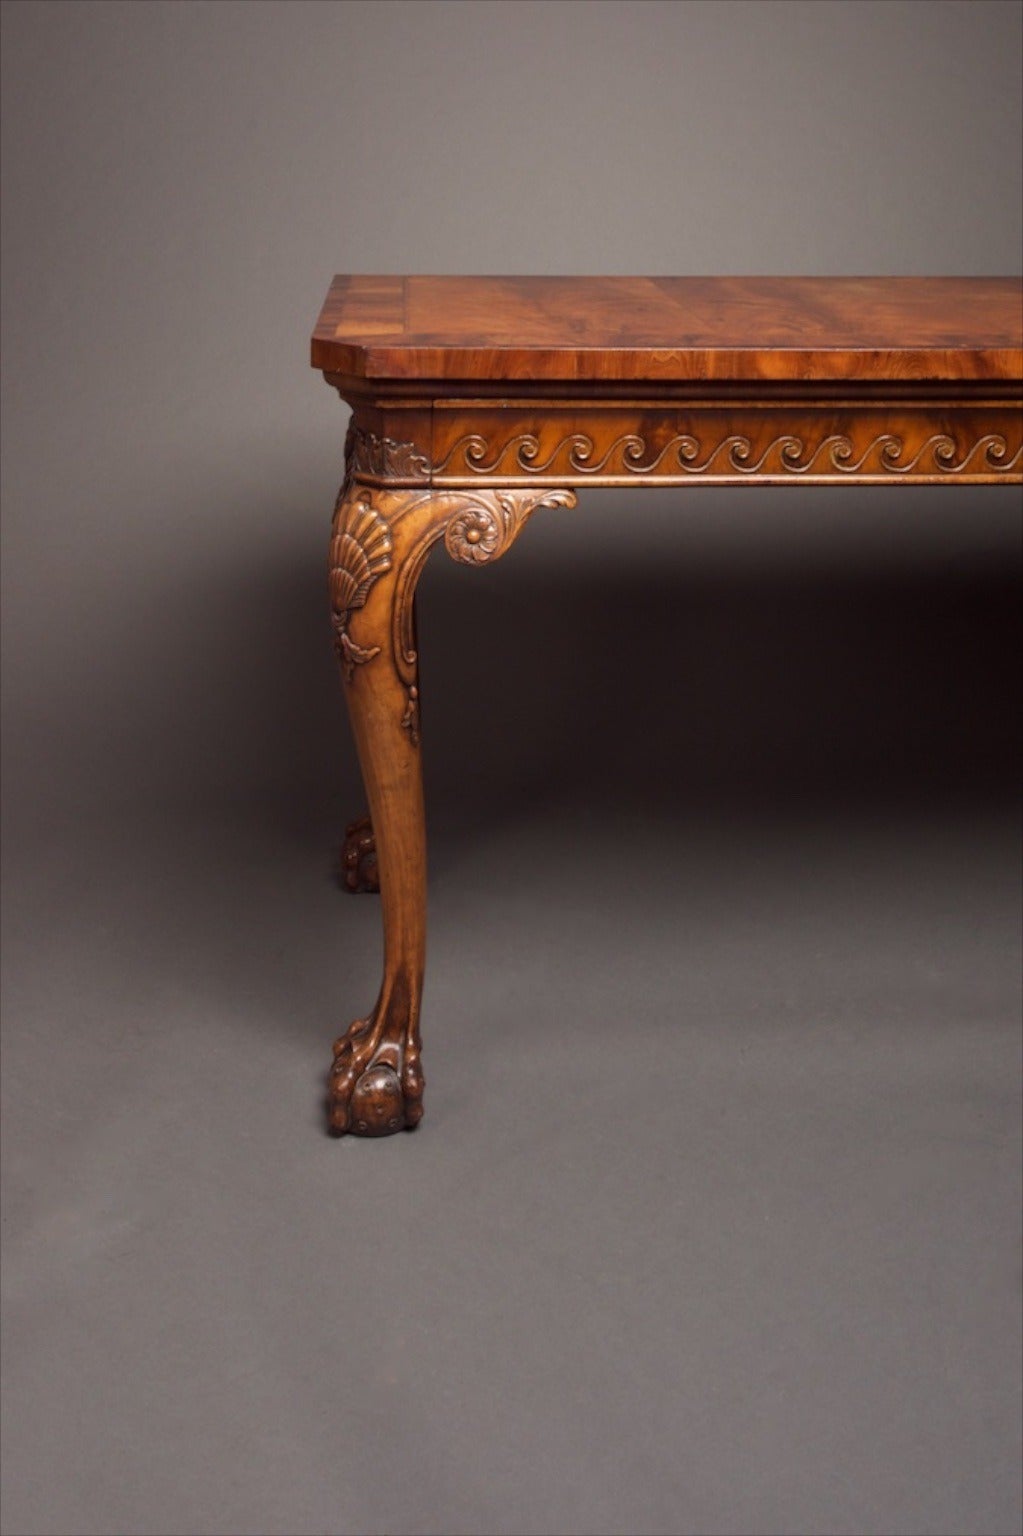 Australian sideboard in cedar and specimen timber inlays, circa 1920s. In the classical Georgian taste, the carving showing native Australian fauna. The piece was made by Sydney cabinetmaker De Groot, infamous for his cutting the ribbon on the